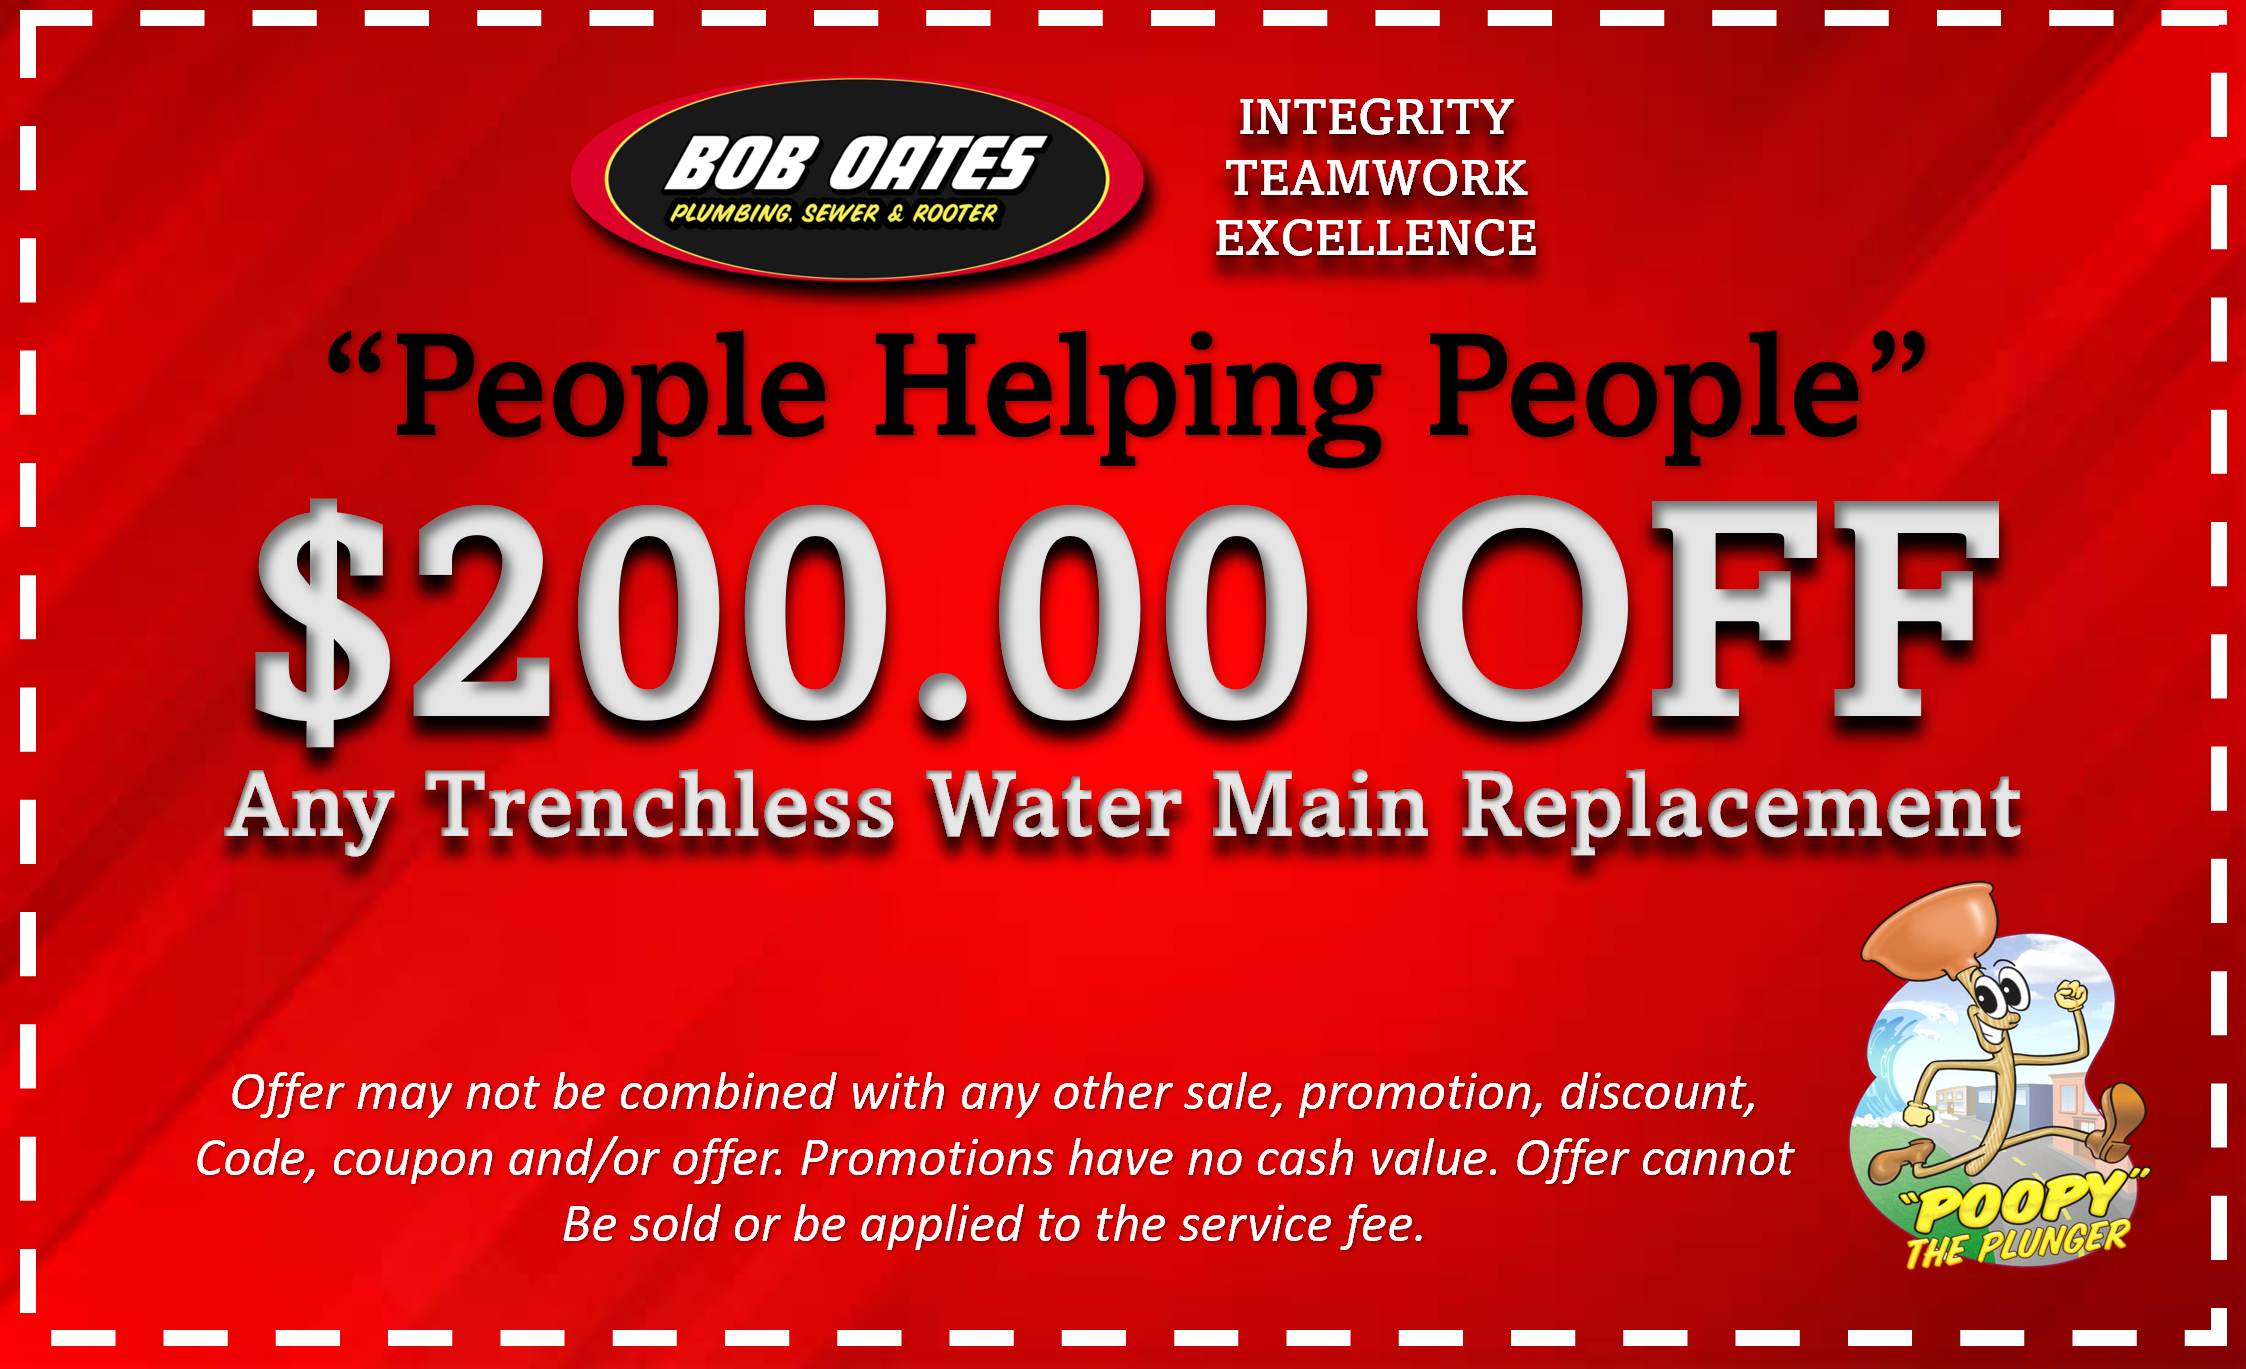 Coupon for $200 off trenchless water main replacement